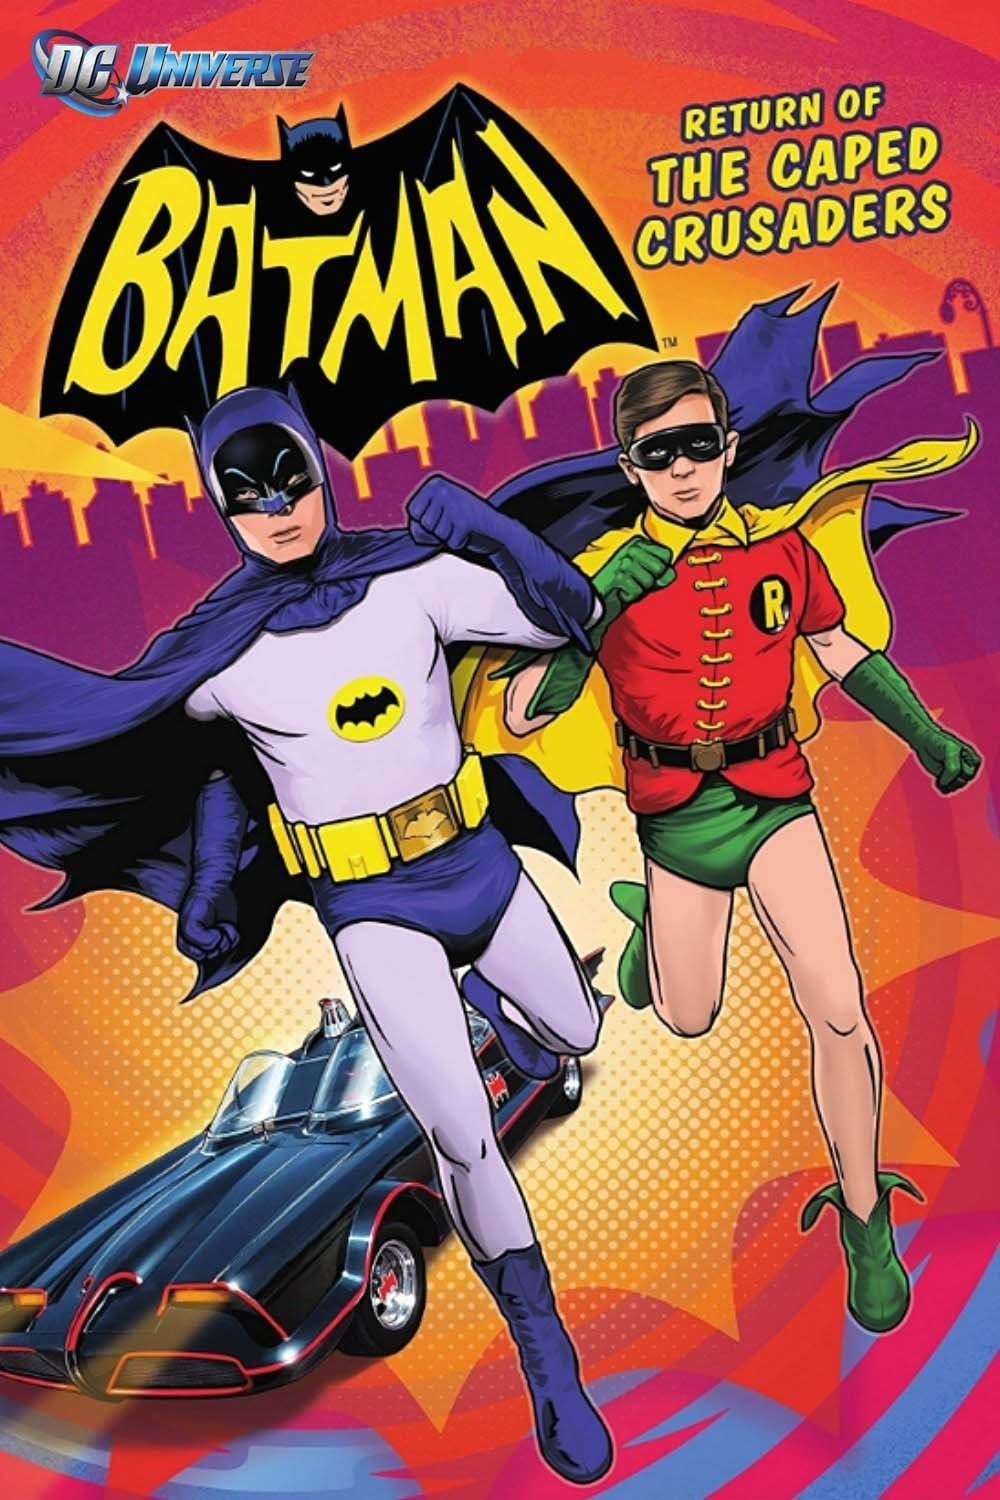 Poster for the movie "Batman: Return of the Caped Crusaders"